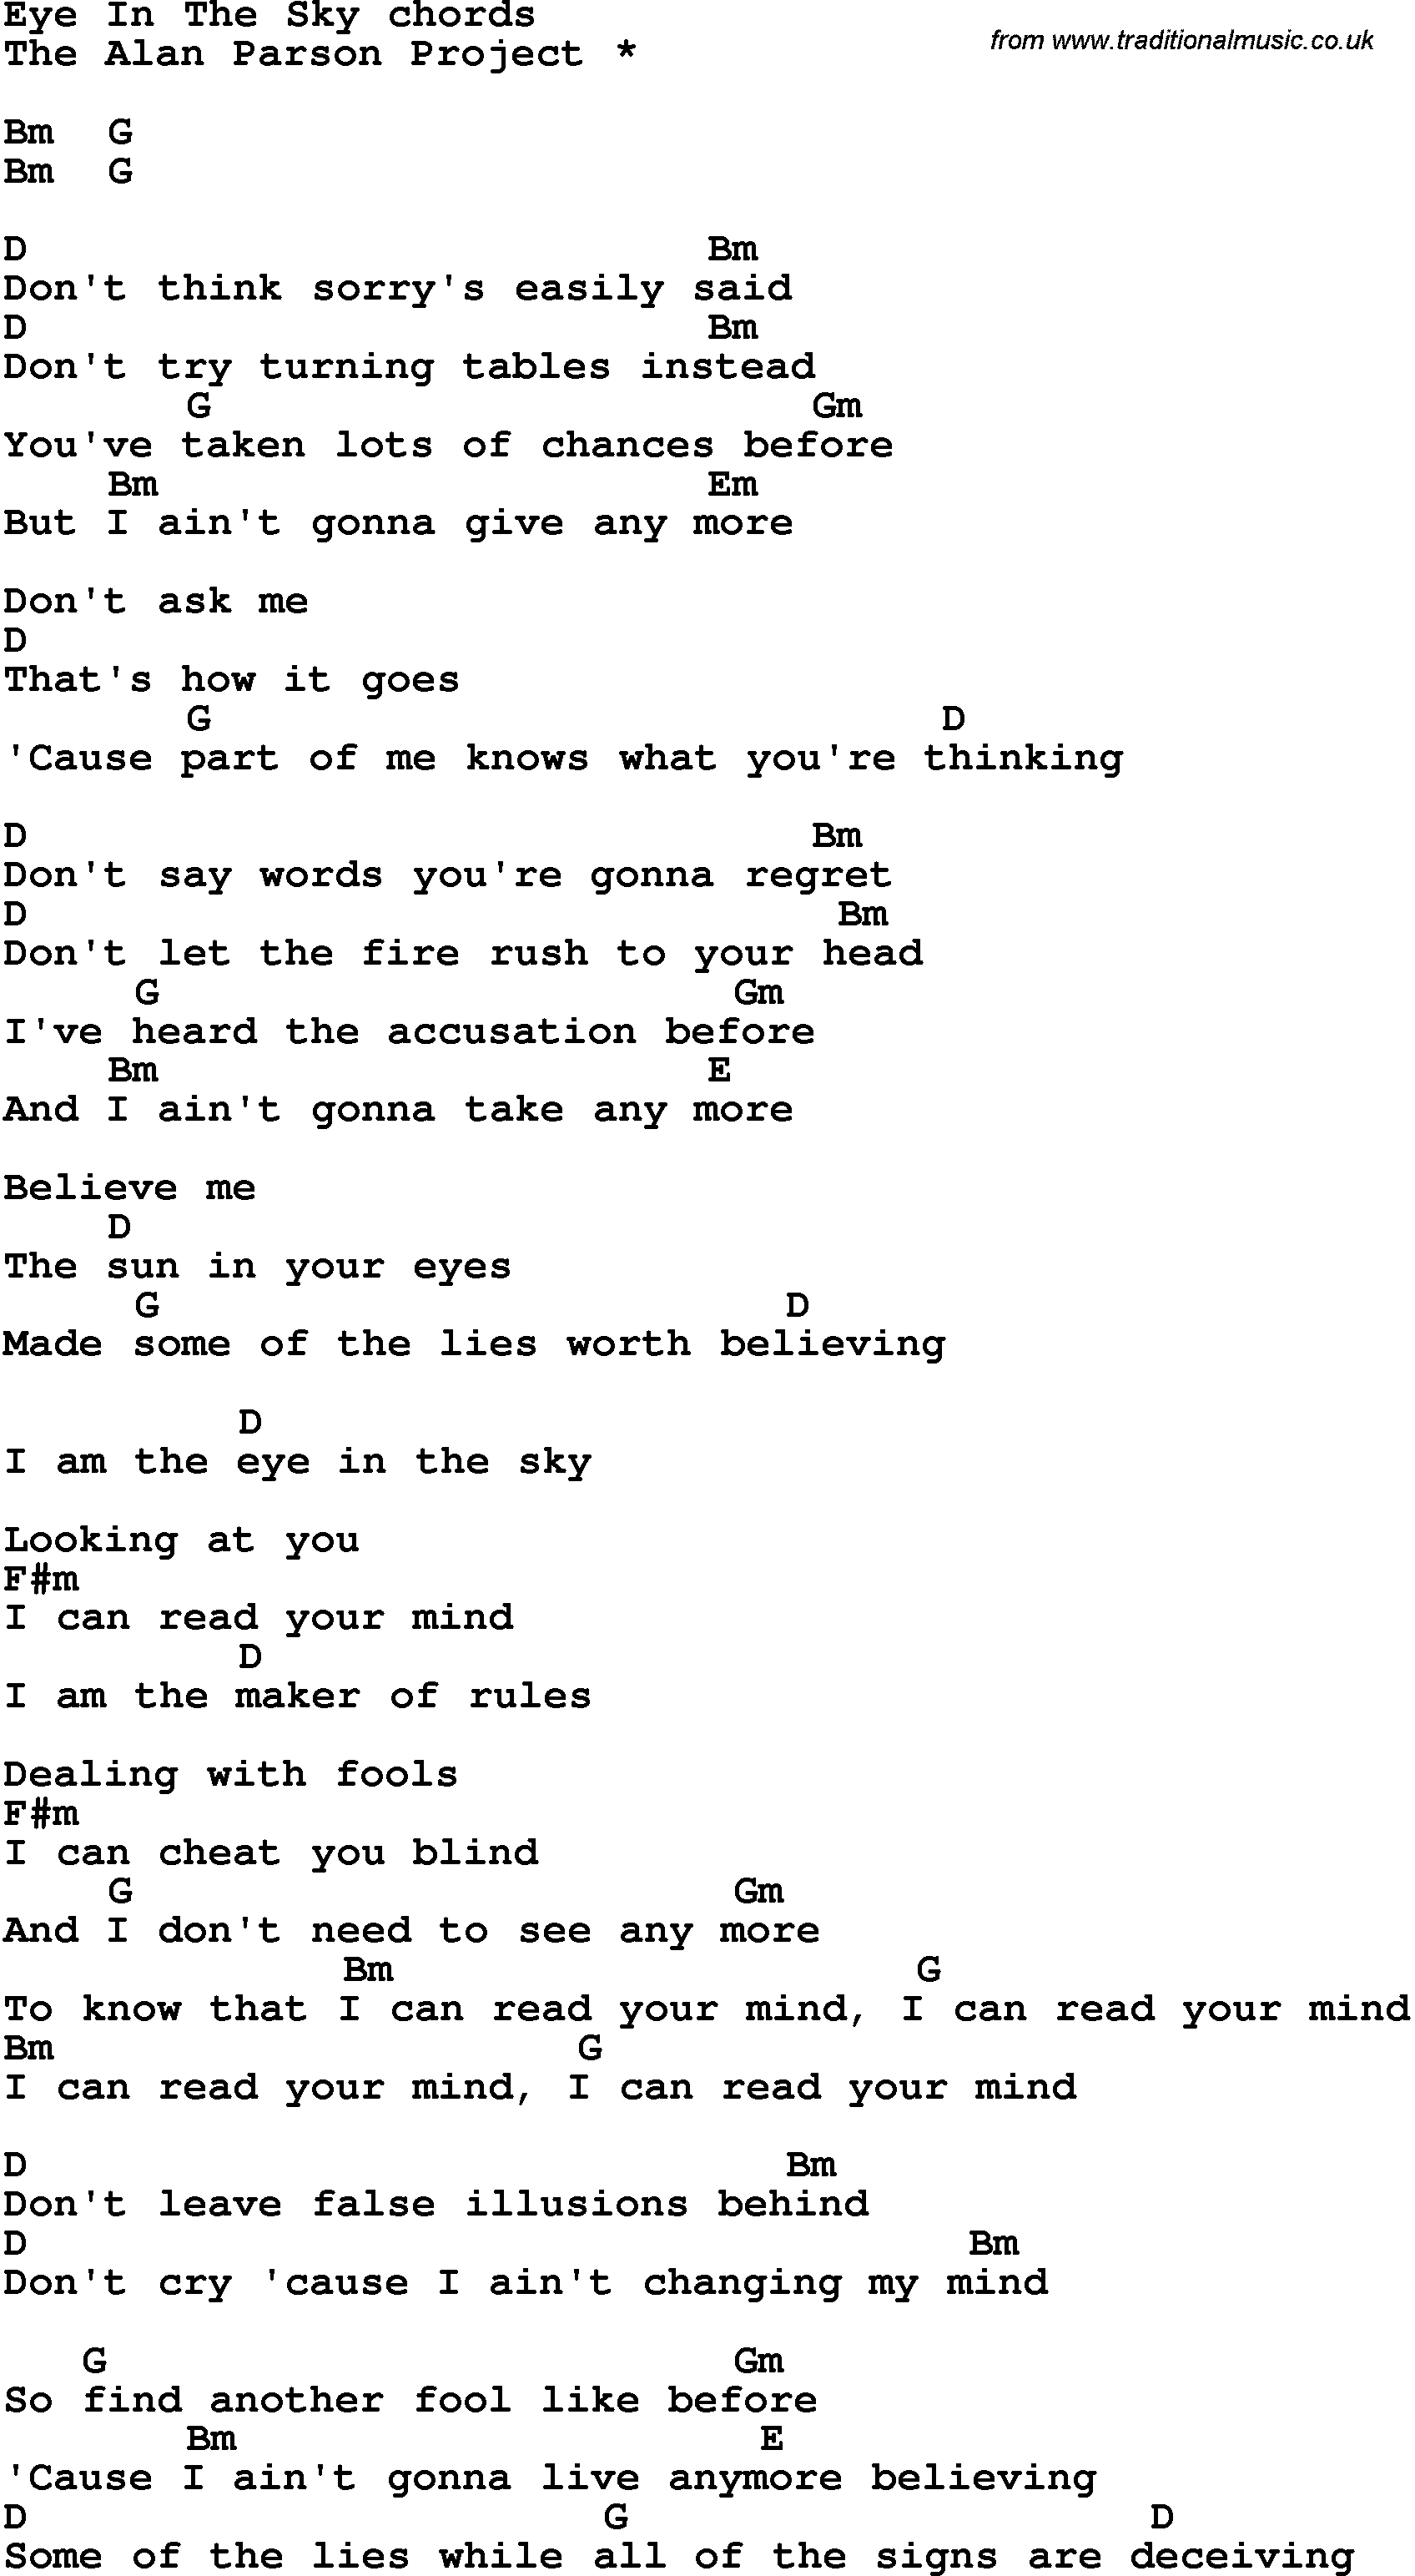 Song Lyrics with guitar chords for Eye In The Sky